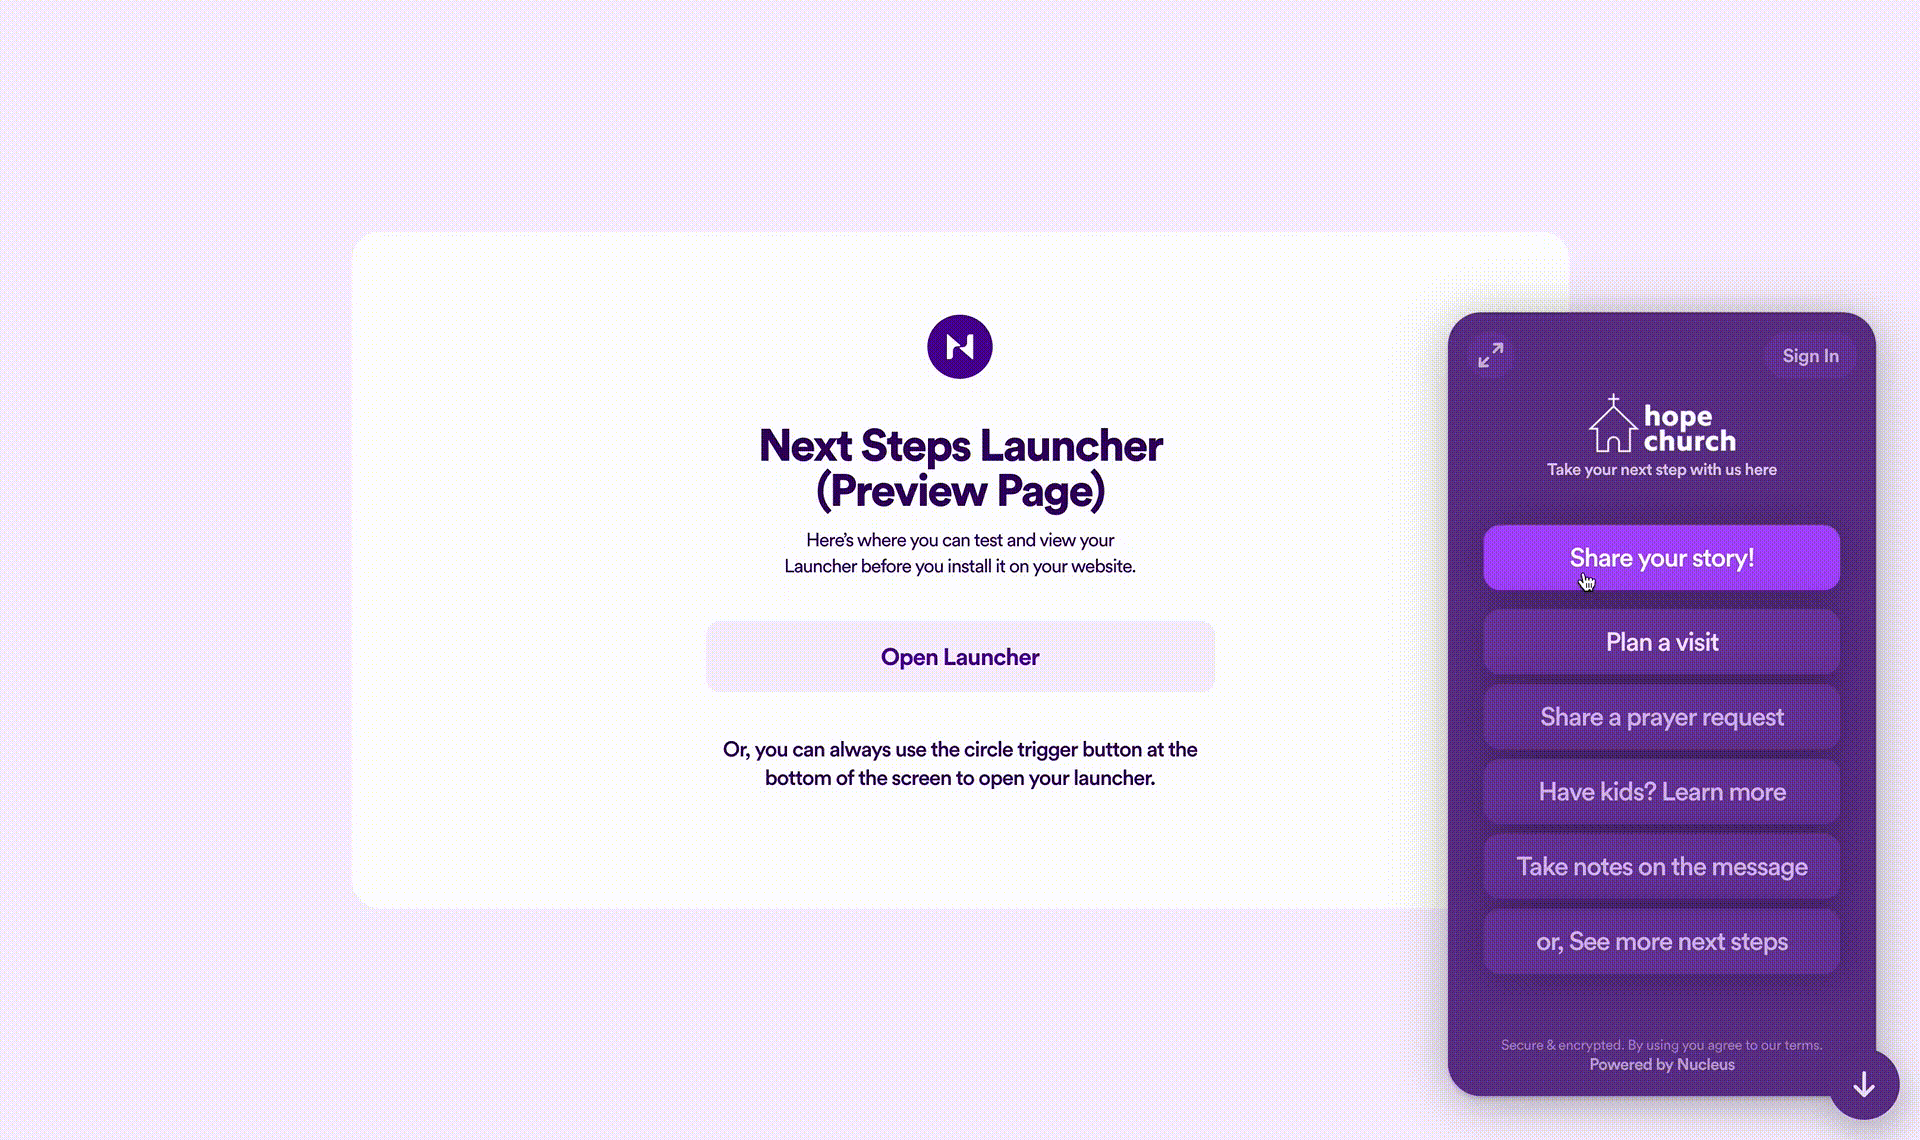 See more next steps in Launcher